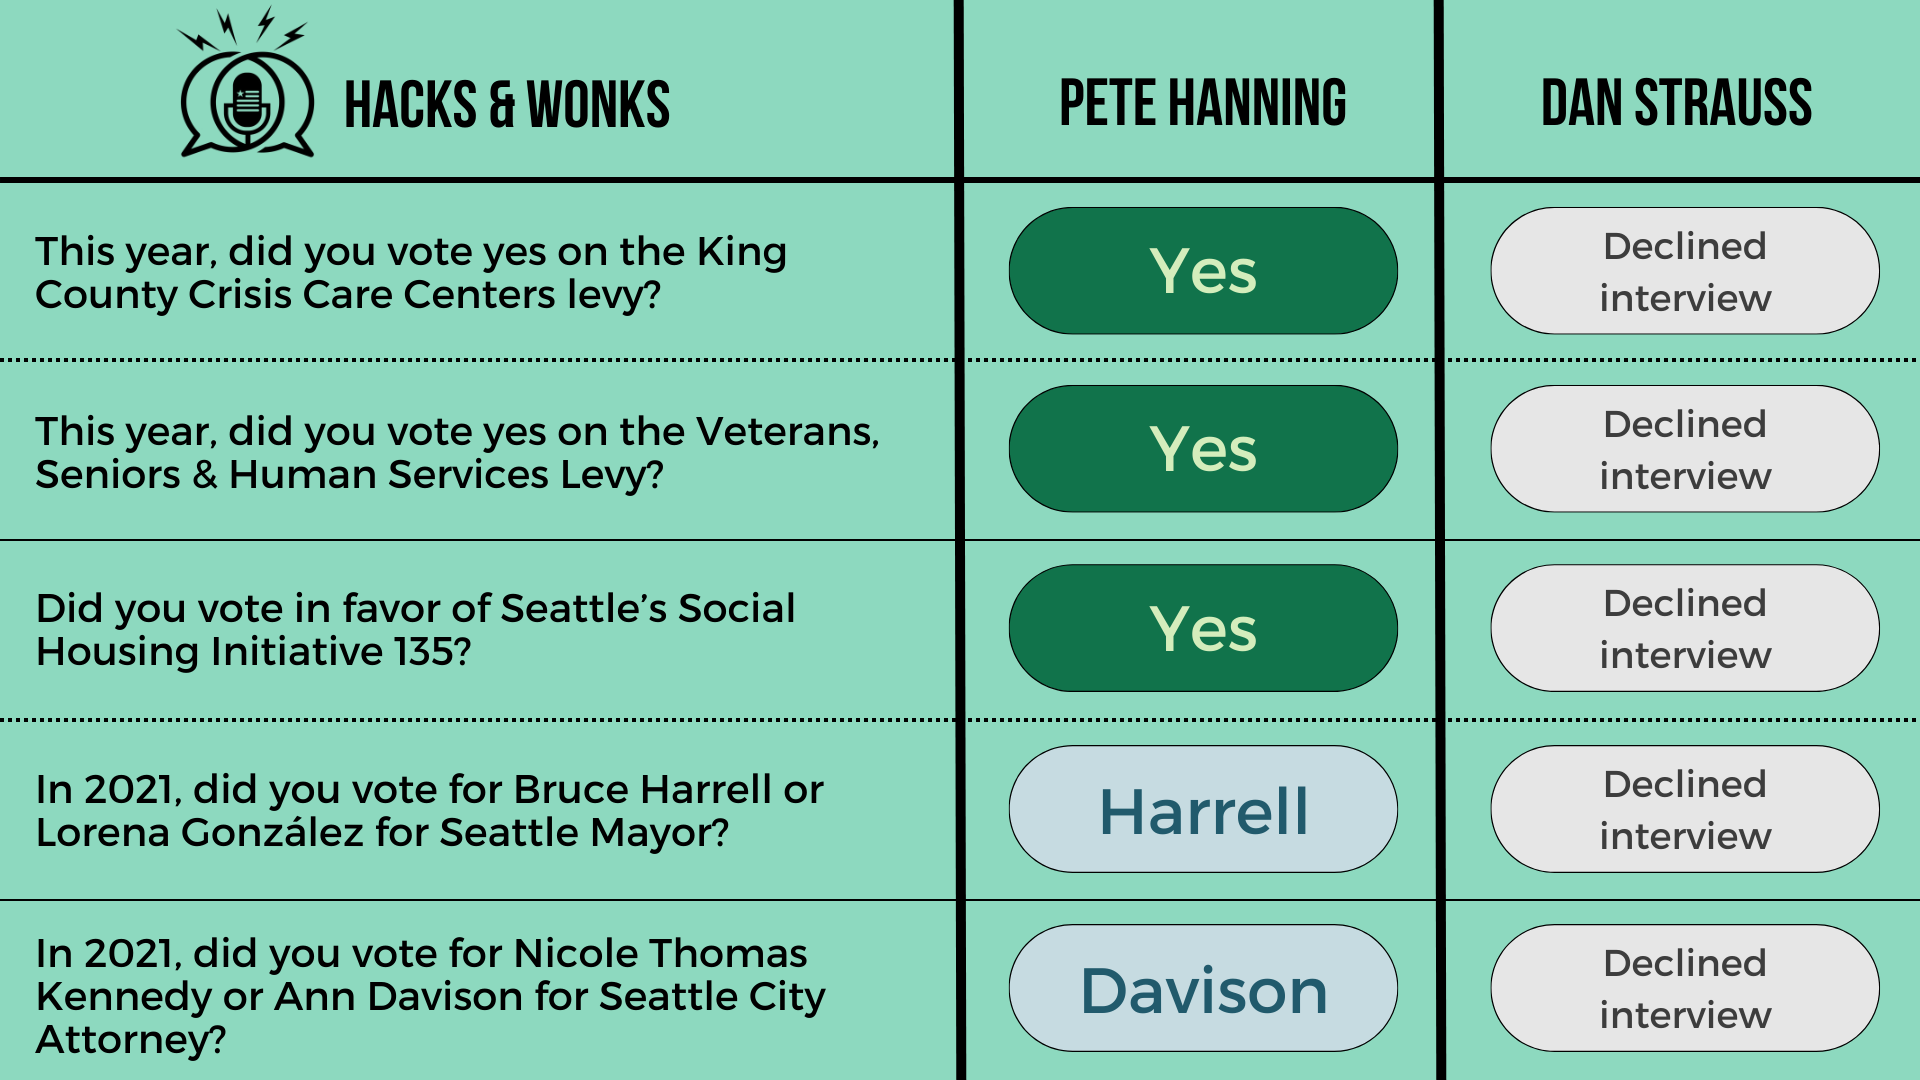 Q: This year, did you vote yes on the King County Crisis Care Centers levy? Pete Hanning: Yes, Dan Strauss: Declined interview  Q: This year, did you vote yes on the Veterans, Seniors & Human Services Levy? Pete Hanning: Yes, Dan Strauss: Declined in